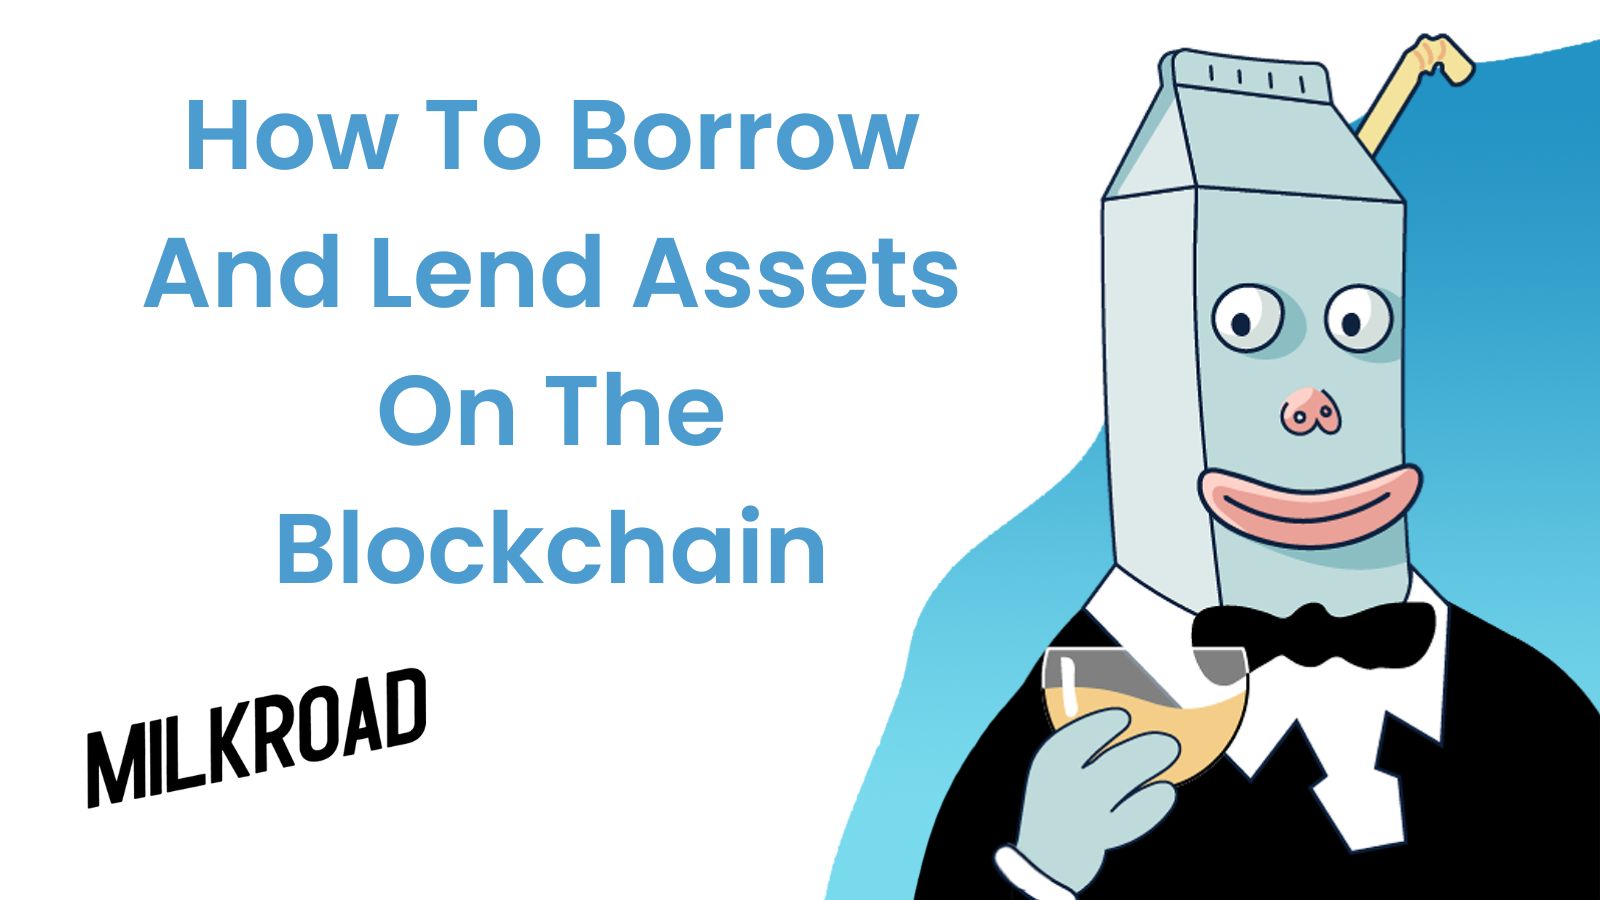 How To Borrow And Lend Assets On The Blockchain